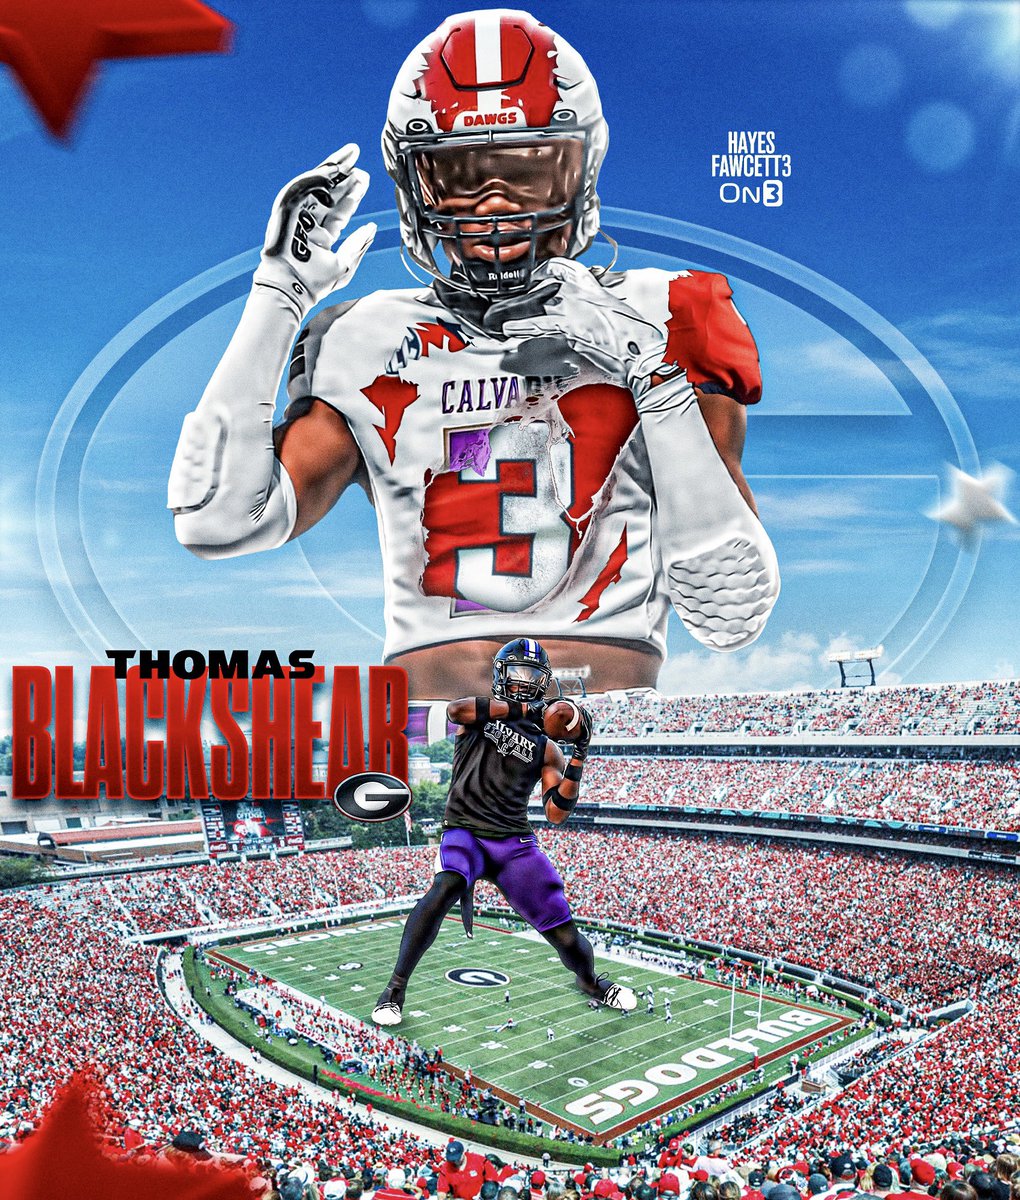 BREAKING: Four-Star ATH Thomas Blackshear has Committed to Georgia, he tells me for @on3recruits The 6’1 196 ATH from Savannah, GA chose the Bulldogs over Florida State and Tennessee “Happy Mother’s Day. I’m Home! GO DAWGS🐶” on3.com/db/thomas-blac…